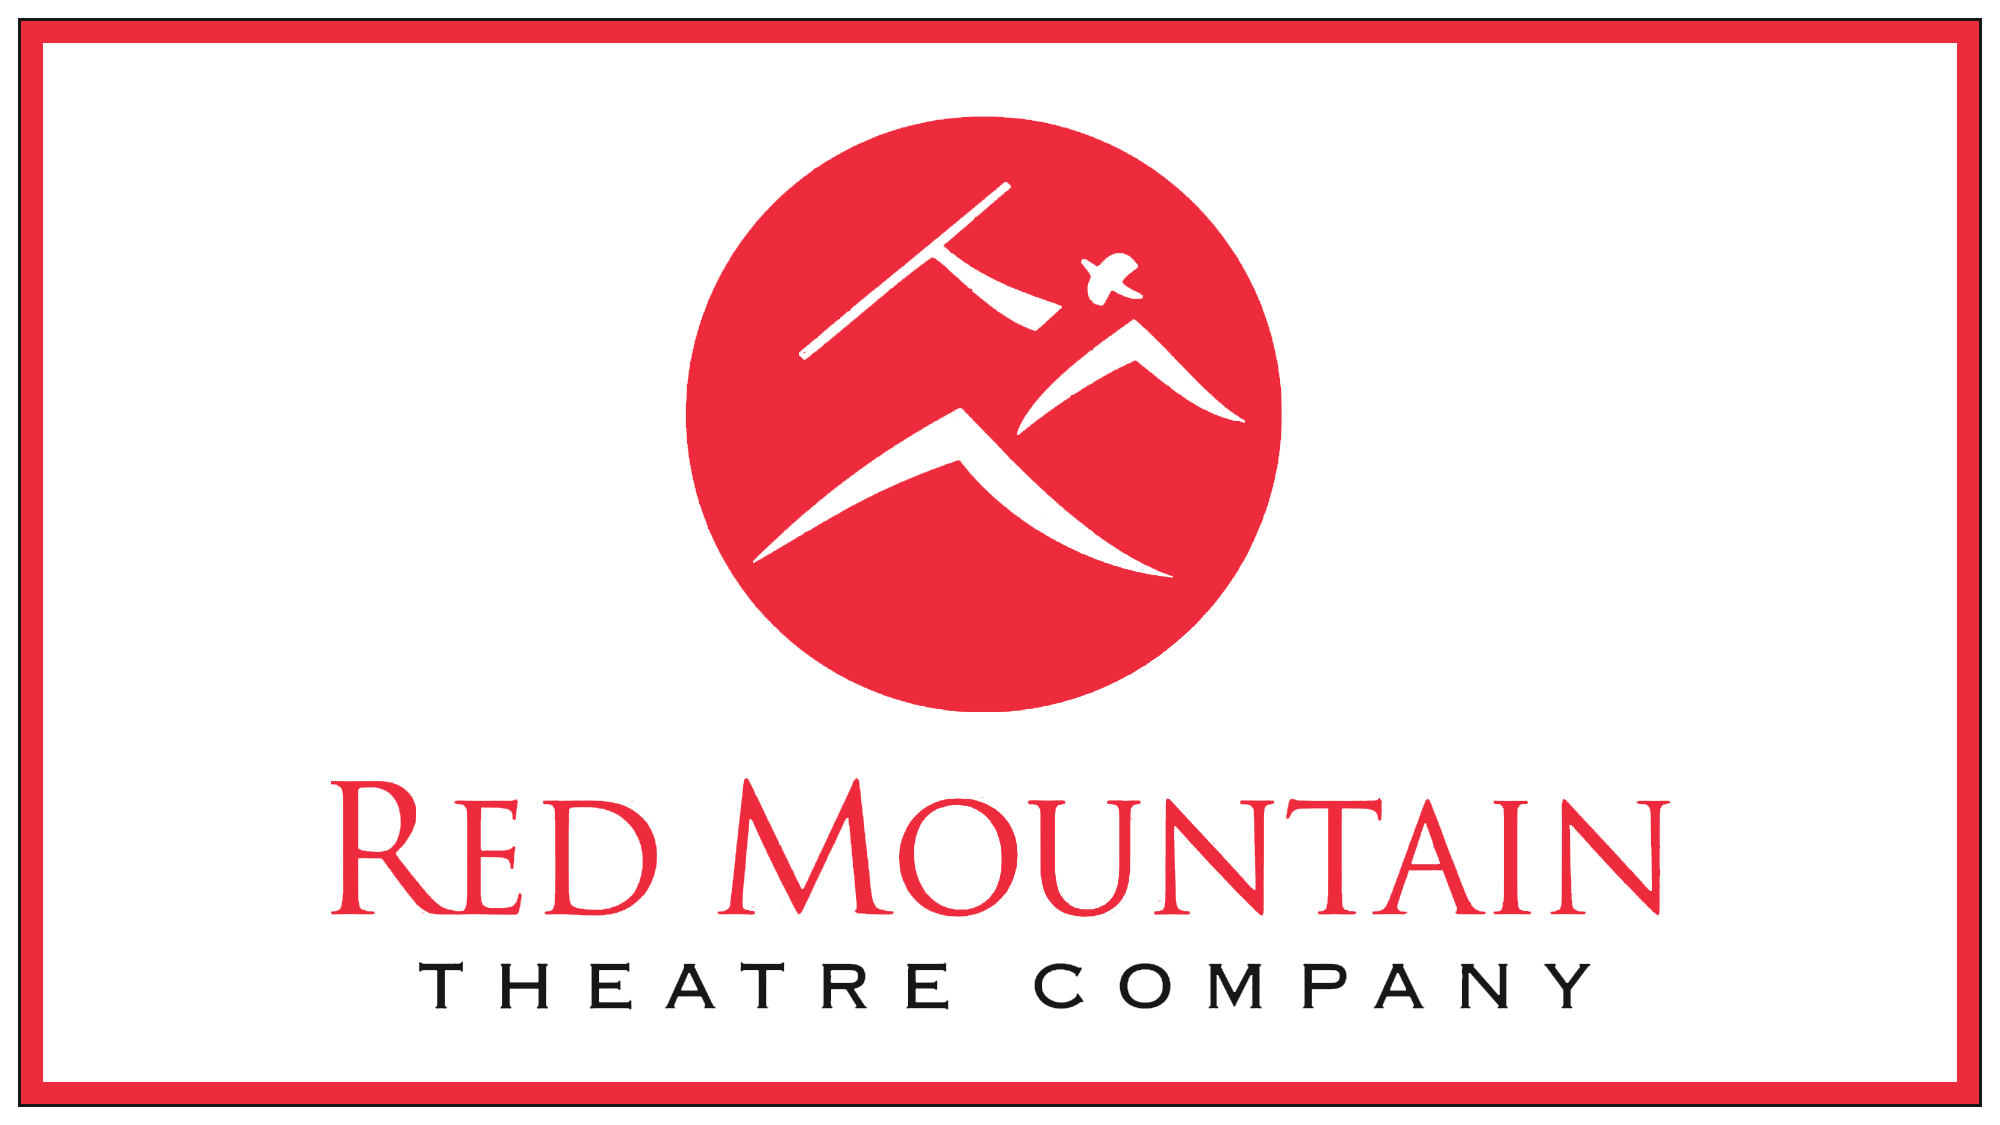 Red Mountain logo. Red Mountain Energy. MT logo. Better Red. Red company